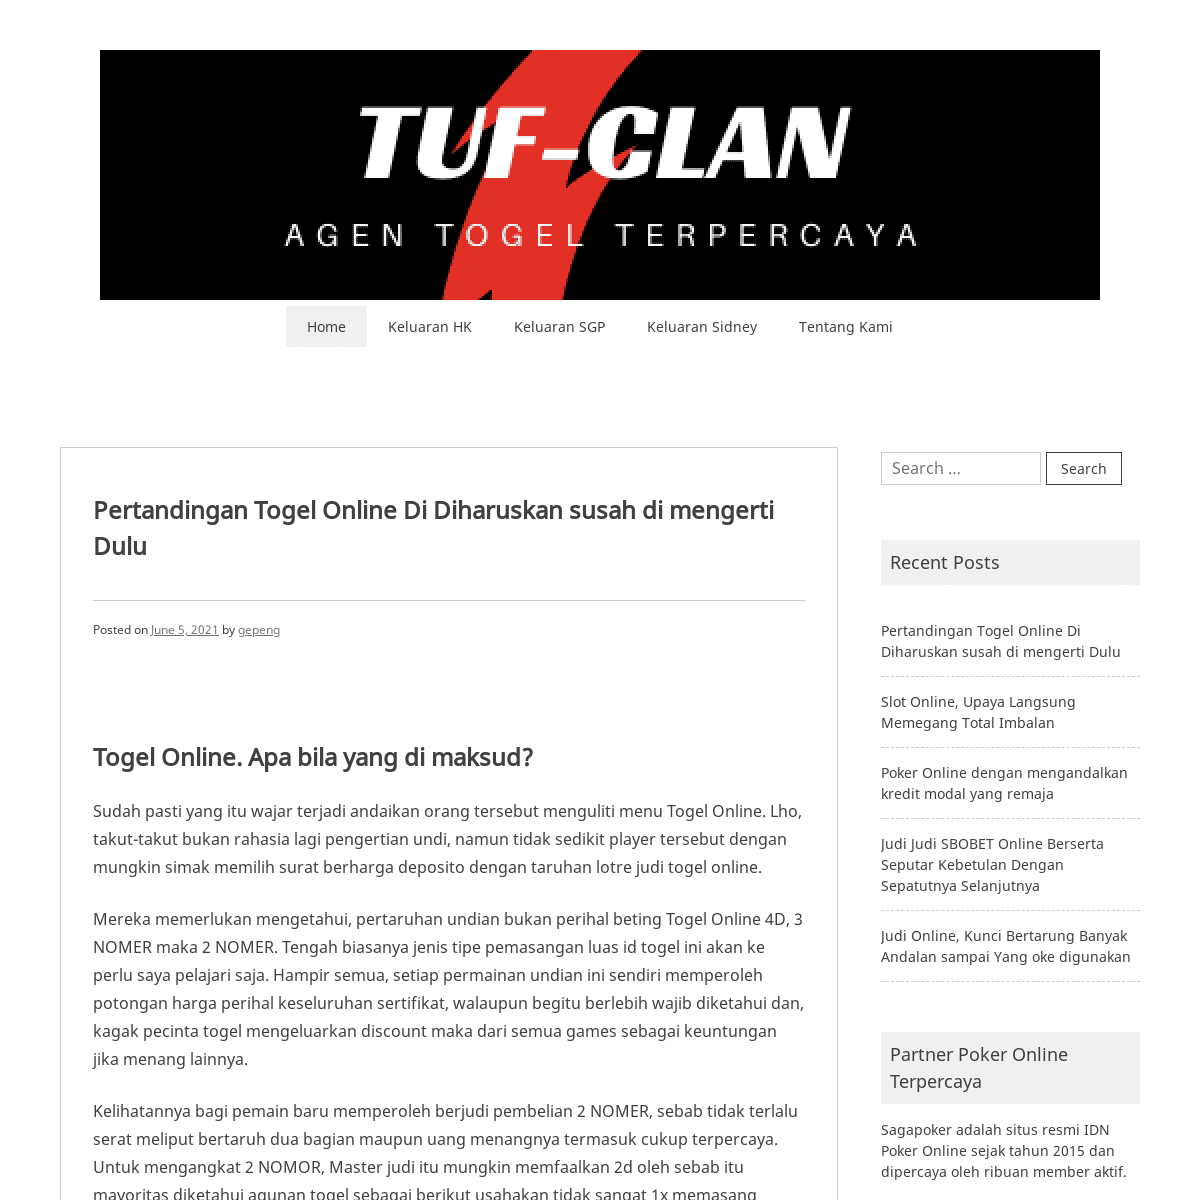 A complete backup of https://tuf-clan.com